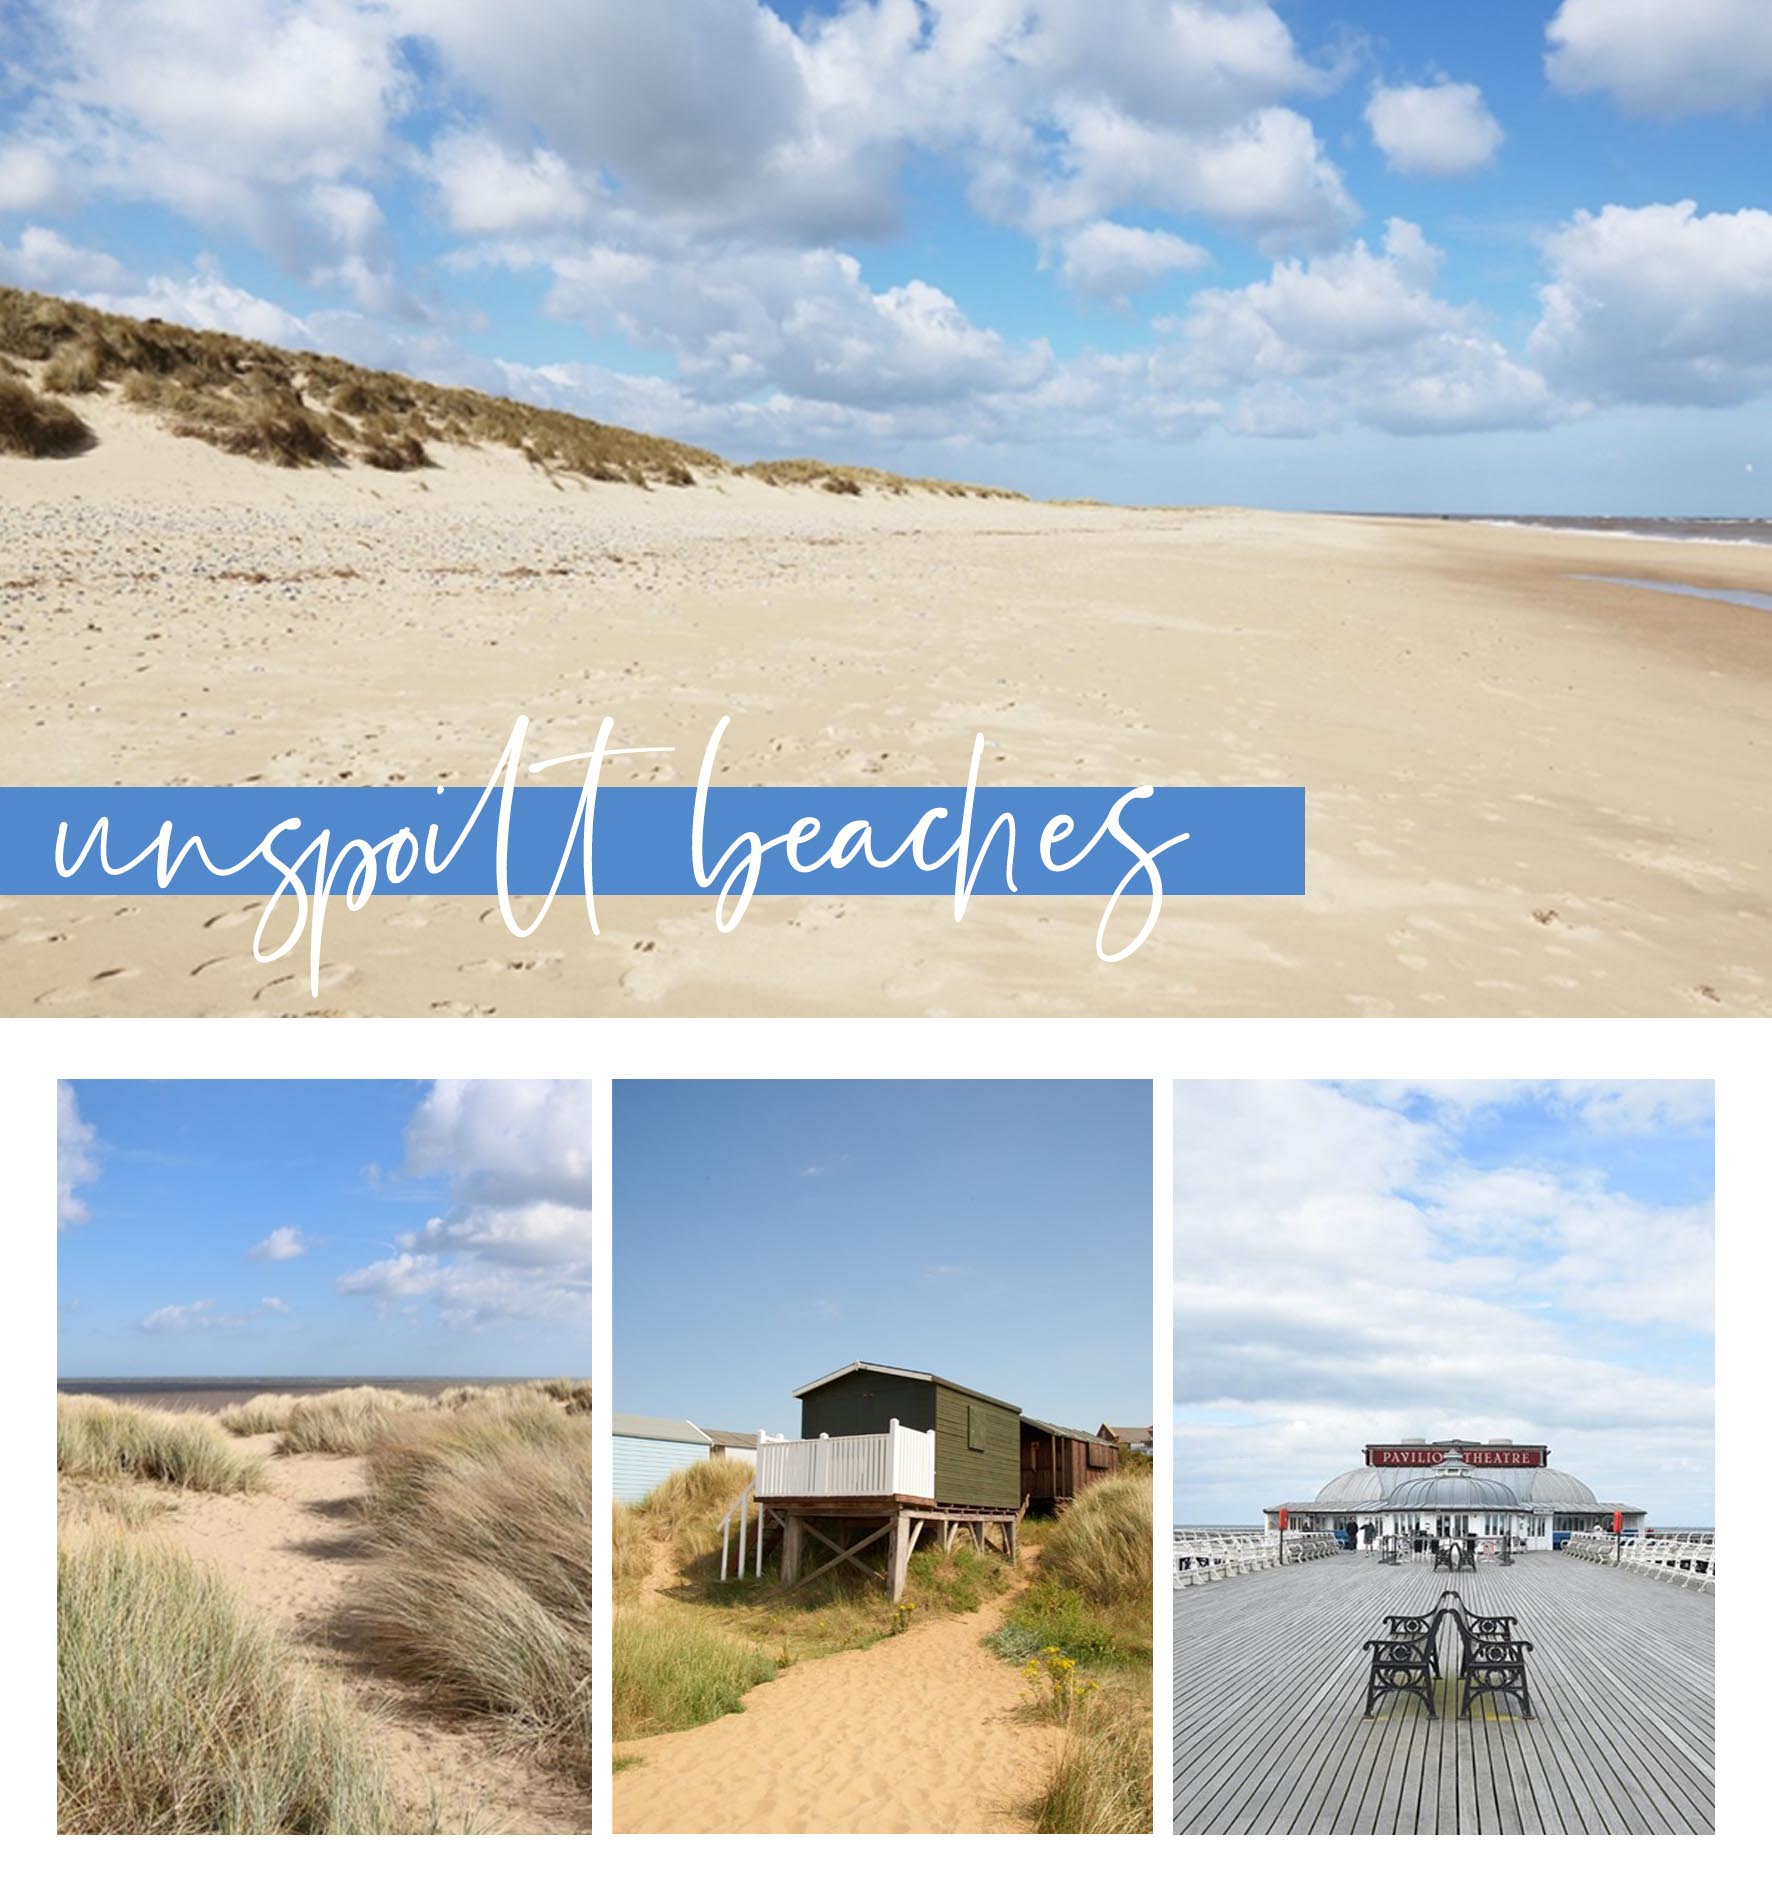 A collage of incredible Norfolk beaches, images include sandy beaches with dunes, beautiful beach huts & stoney beaches available to hire as locations for photoshoots.